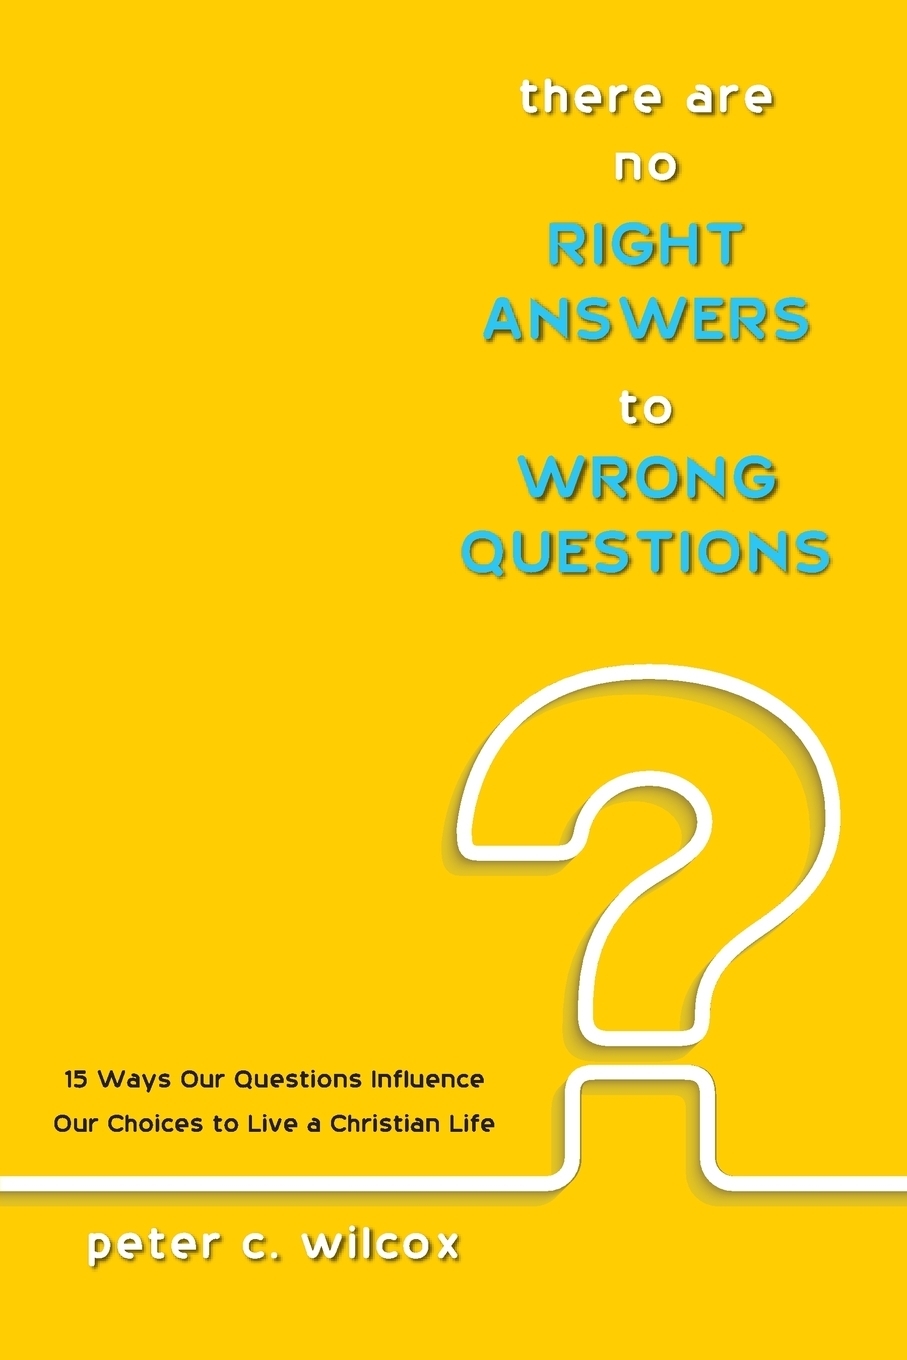 Right answer. Wrong questions. Заказать questions. Pick the right answers ответа. Wrong question